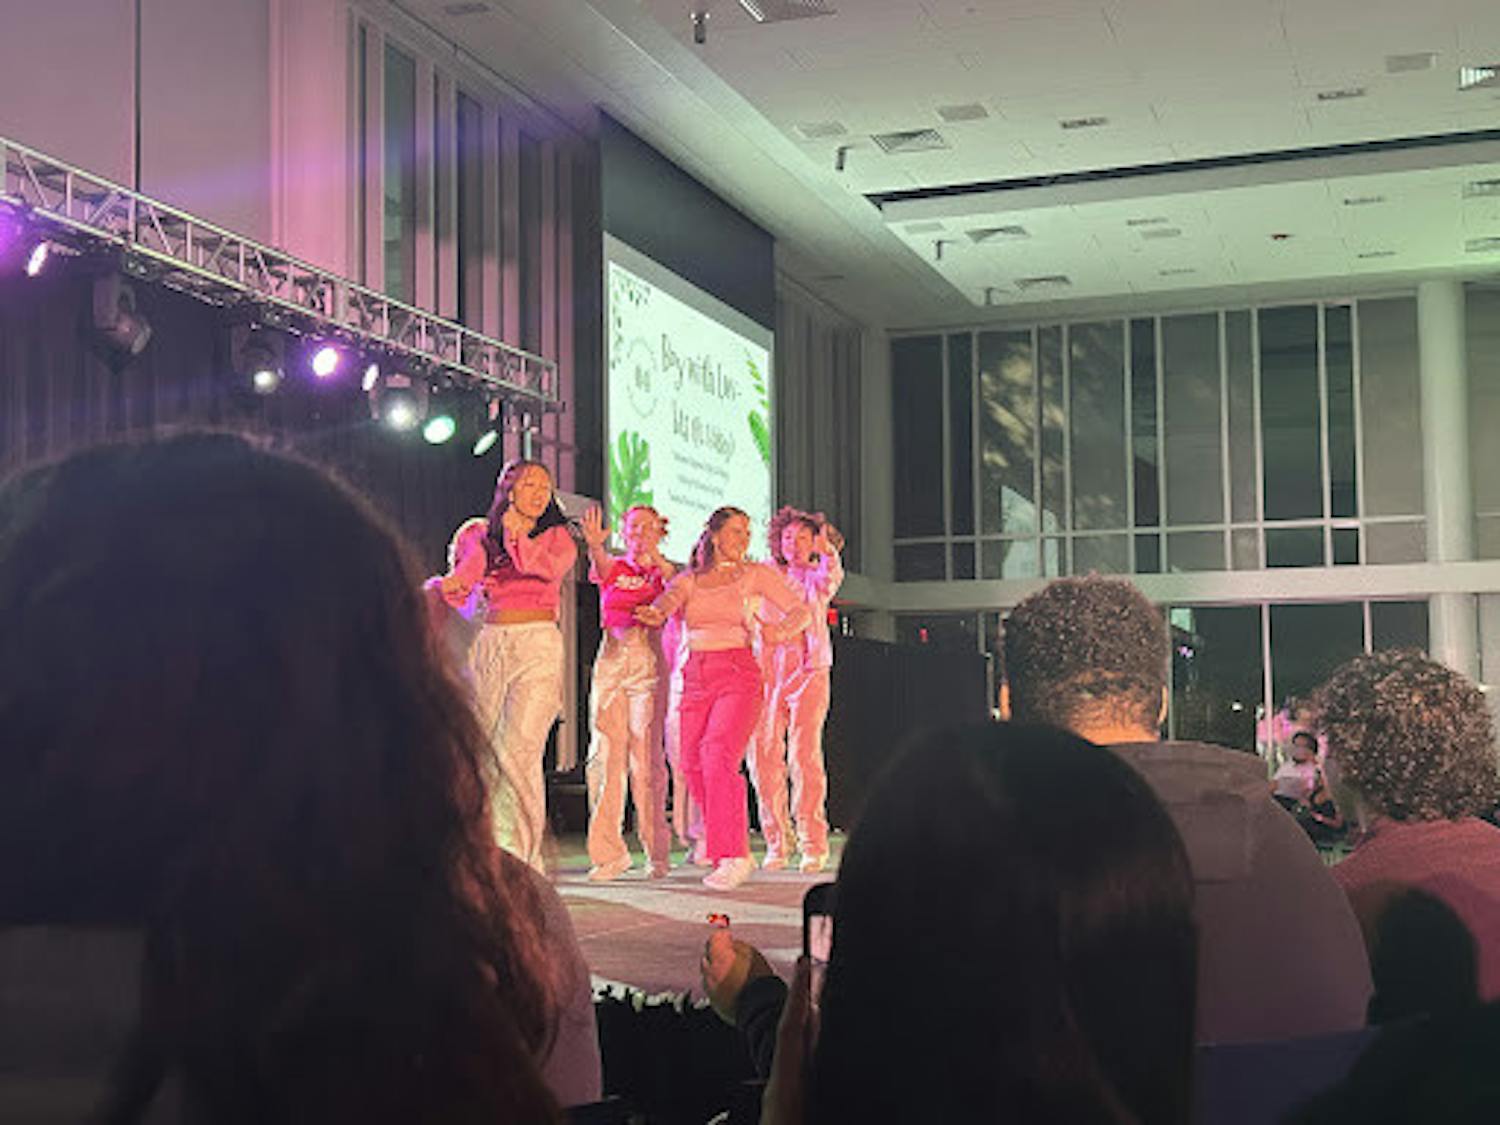 Kohesion’s second annual showcase, Growhesion, featured multiple dance covers of K-Pop groups, ranging from BTS to IVE (Photo Courtesy of Jenna Rittman / Correspondent).